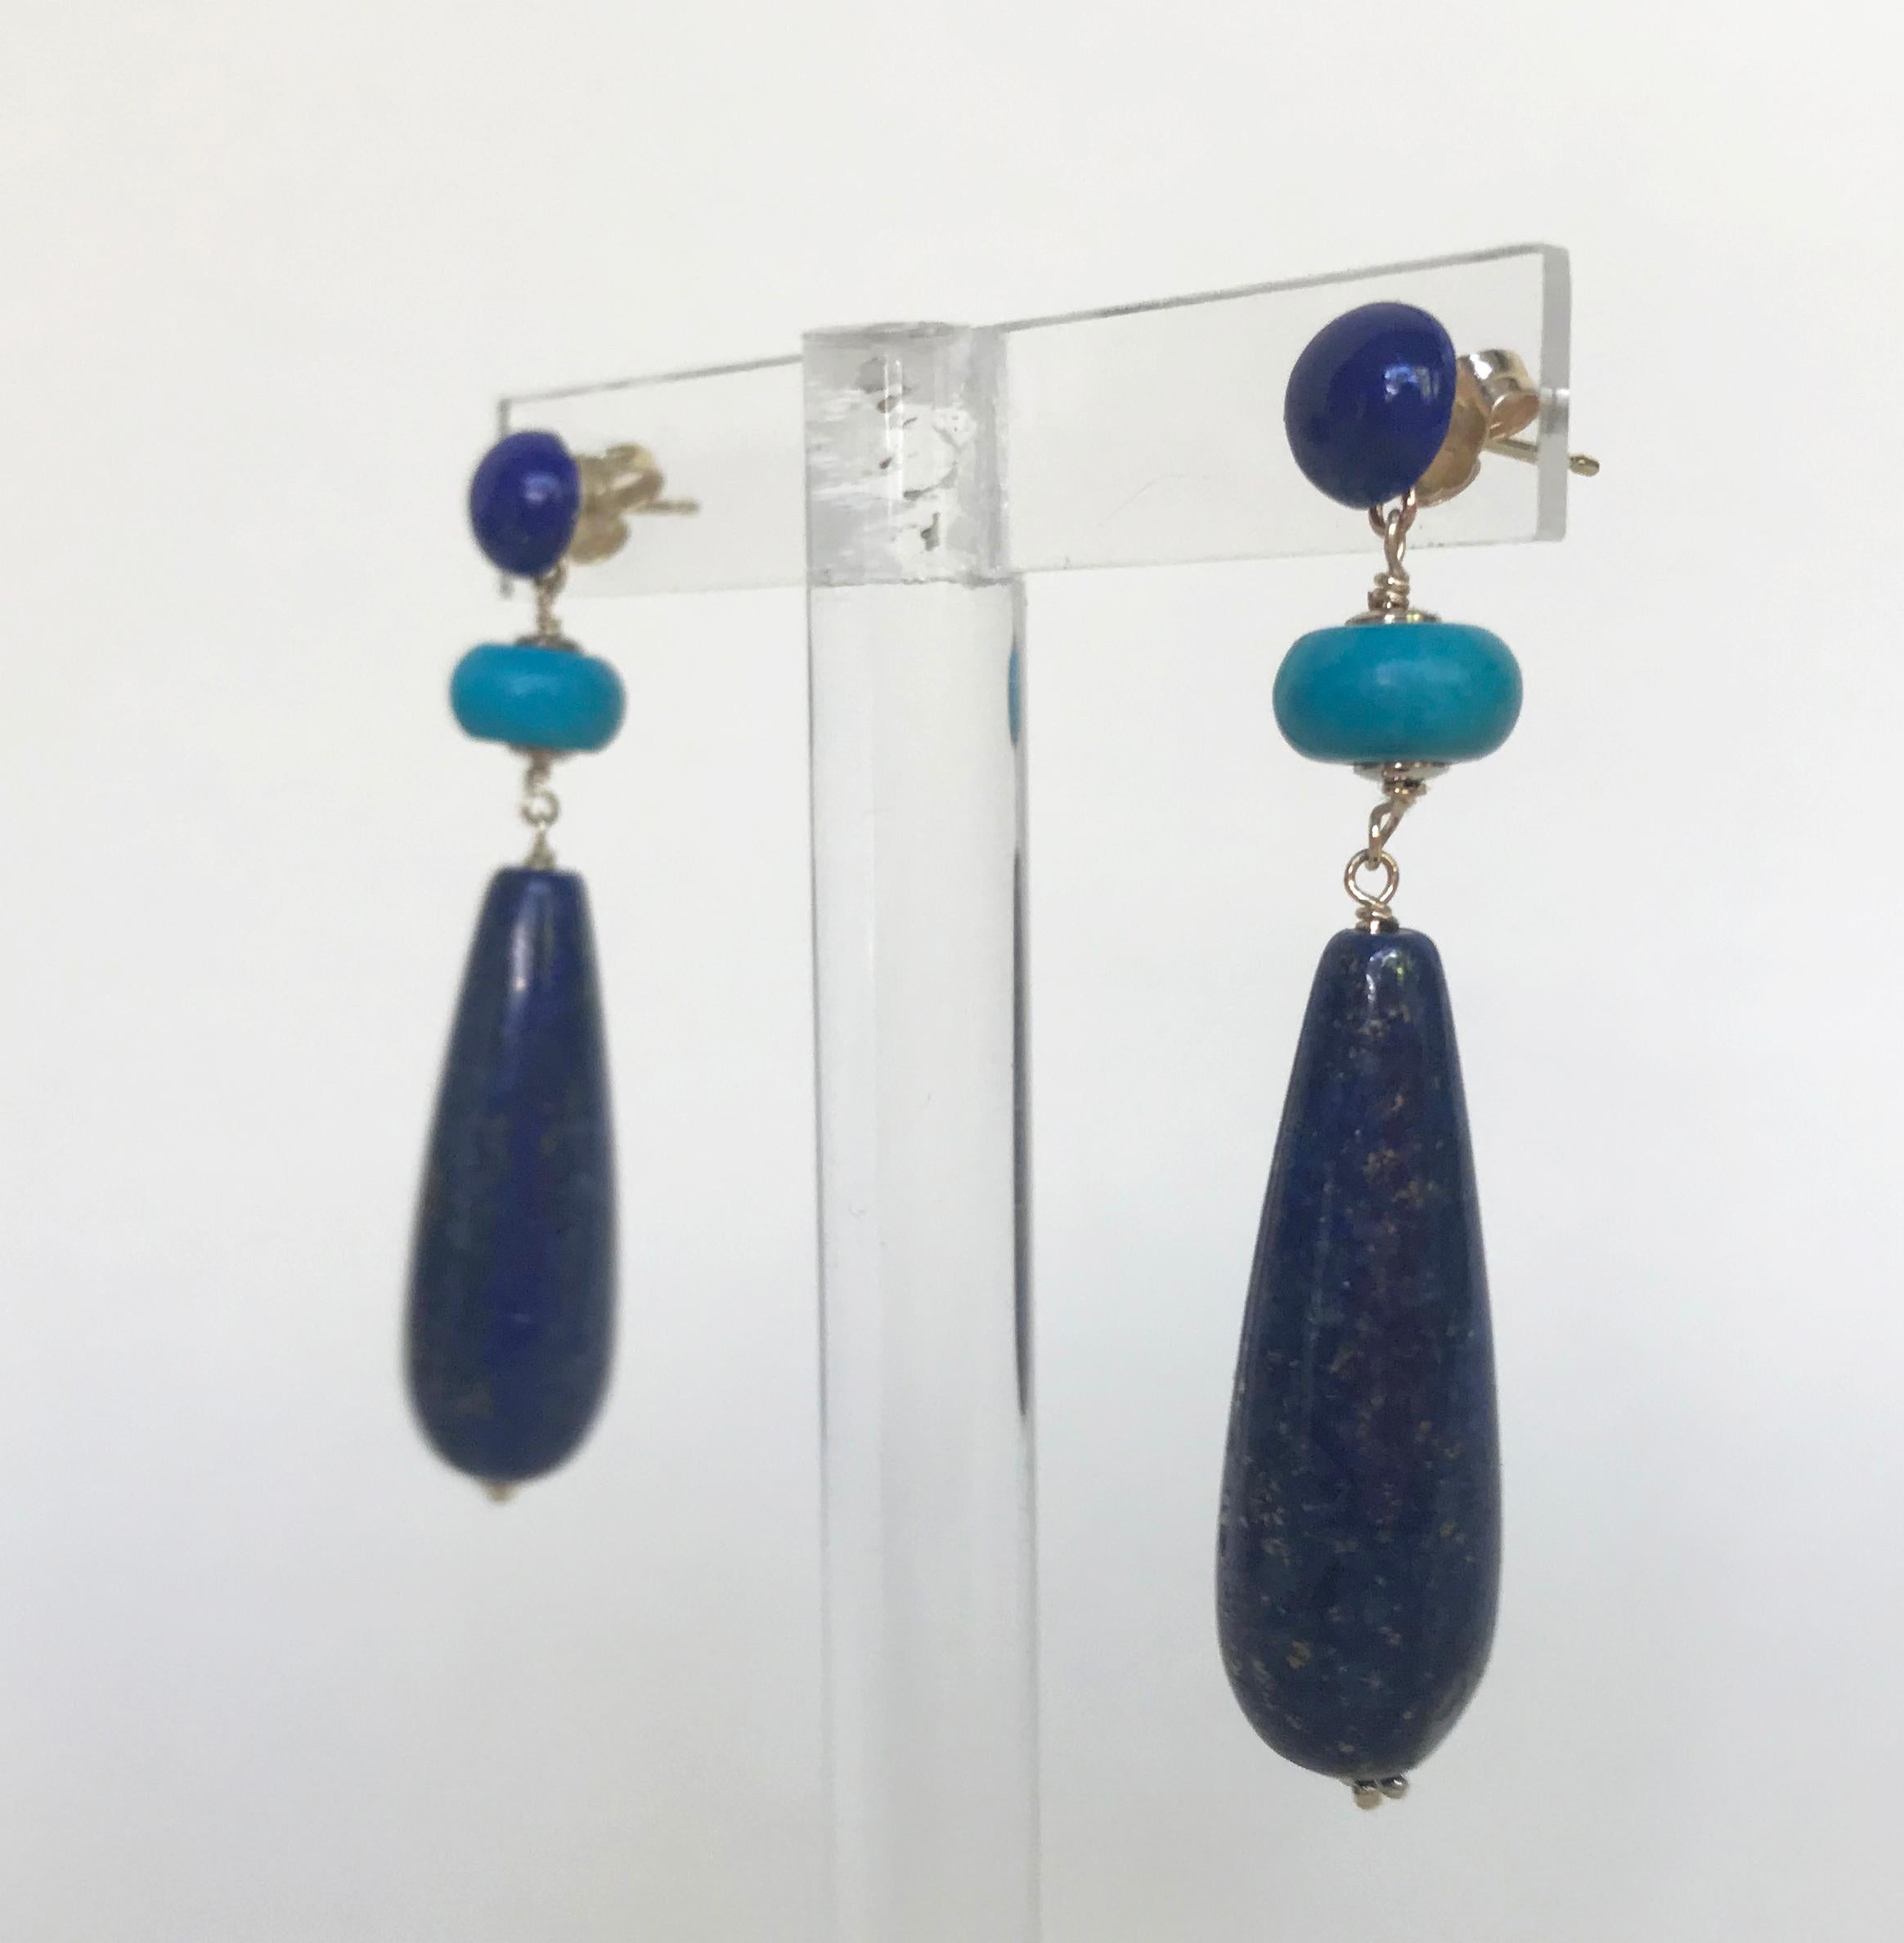 This lapis lazuli and turquoise earrings are highlighted with 14k yellow gold wiring and stud.  Accenting the deep blue of the lapis lazuli studs are light blue turquoise beads hanging above. Completing the look there is a lapis lazuli drop bead. At